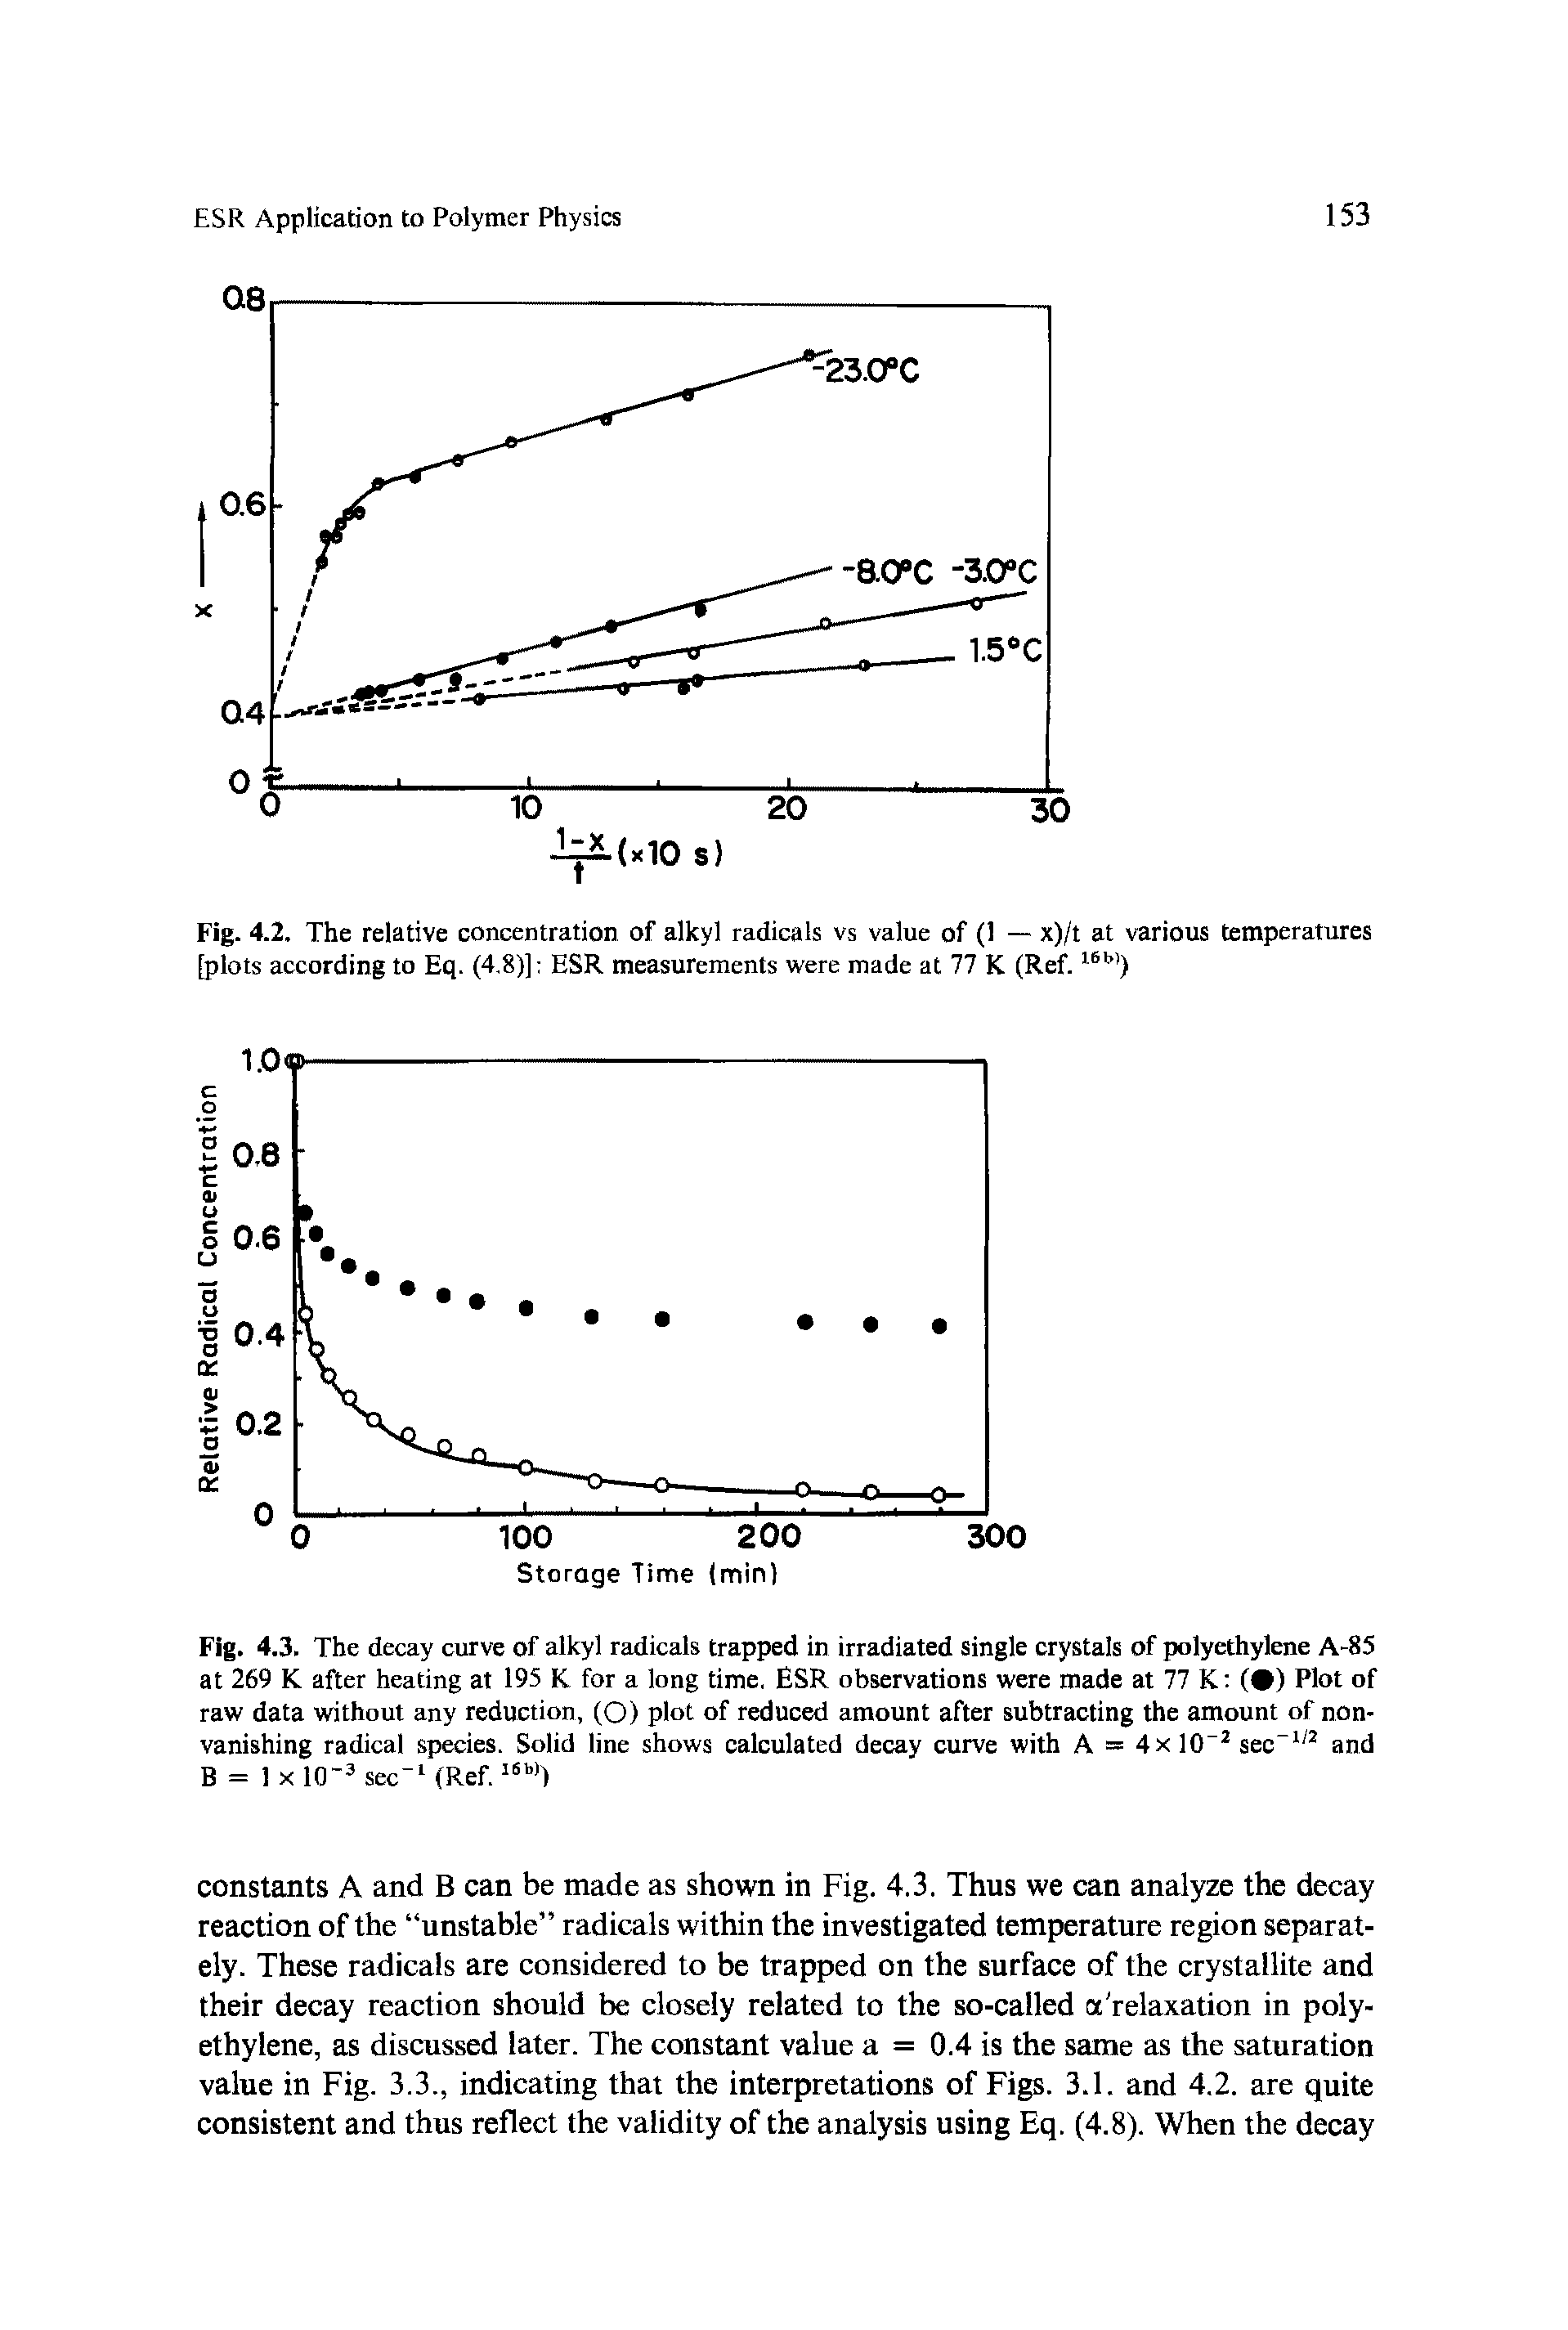 Fig. 4.3. The decay curve of alkyl radicals trapped in irradiated single crystals of polyethylene A-85 at 269 K after heating at 195 K for a long time. ESR observations were made at 77 K ( ) Plot of raw data without any reduction, (O) plot of reduced amount after subtracting the amount of nonvanishing radical species. Solid line shows calculated decay curve with A = 4x 10 sec and B = lxlO sec (Ref.